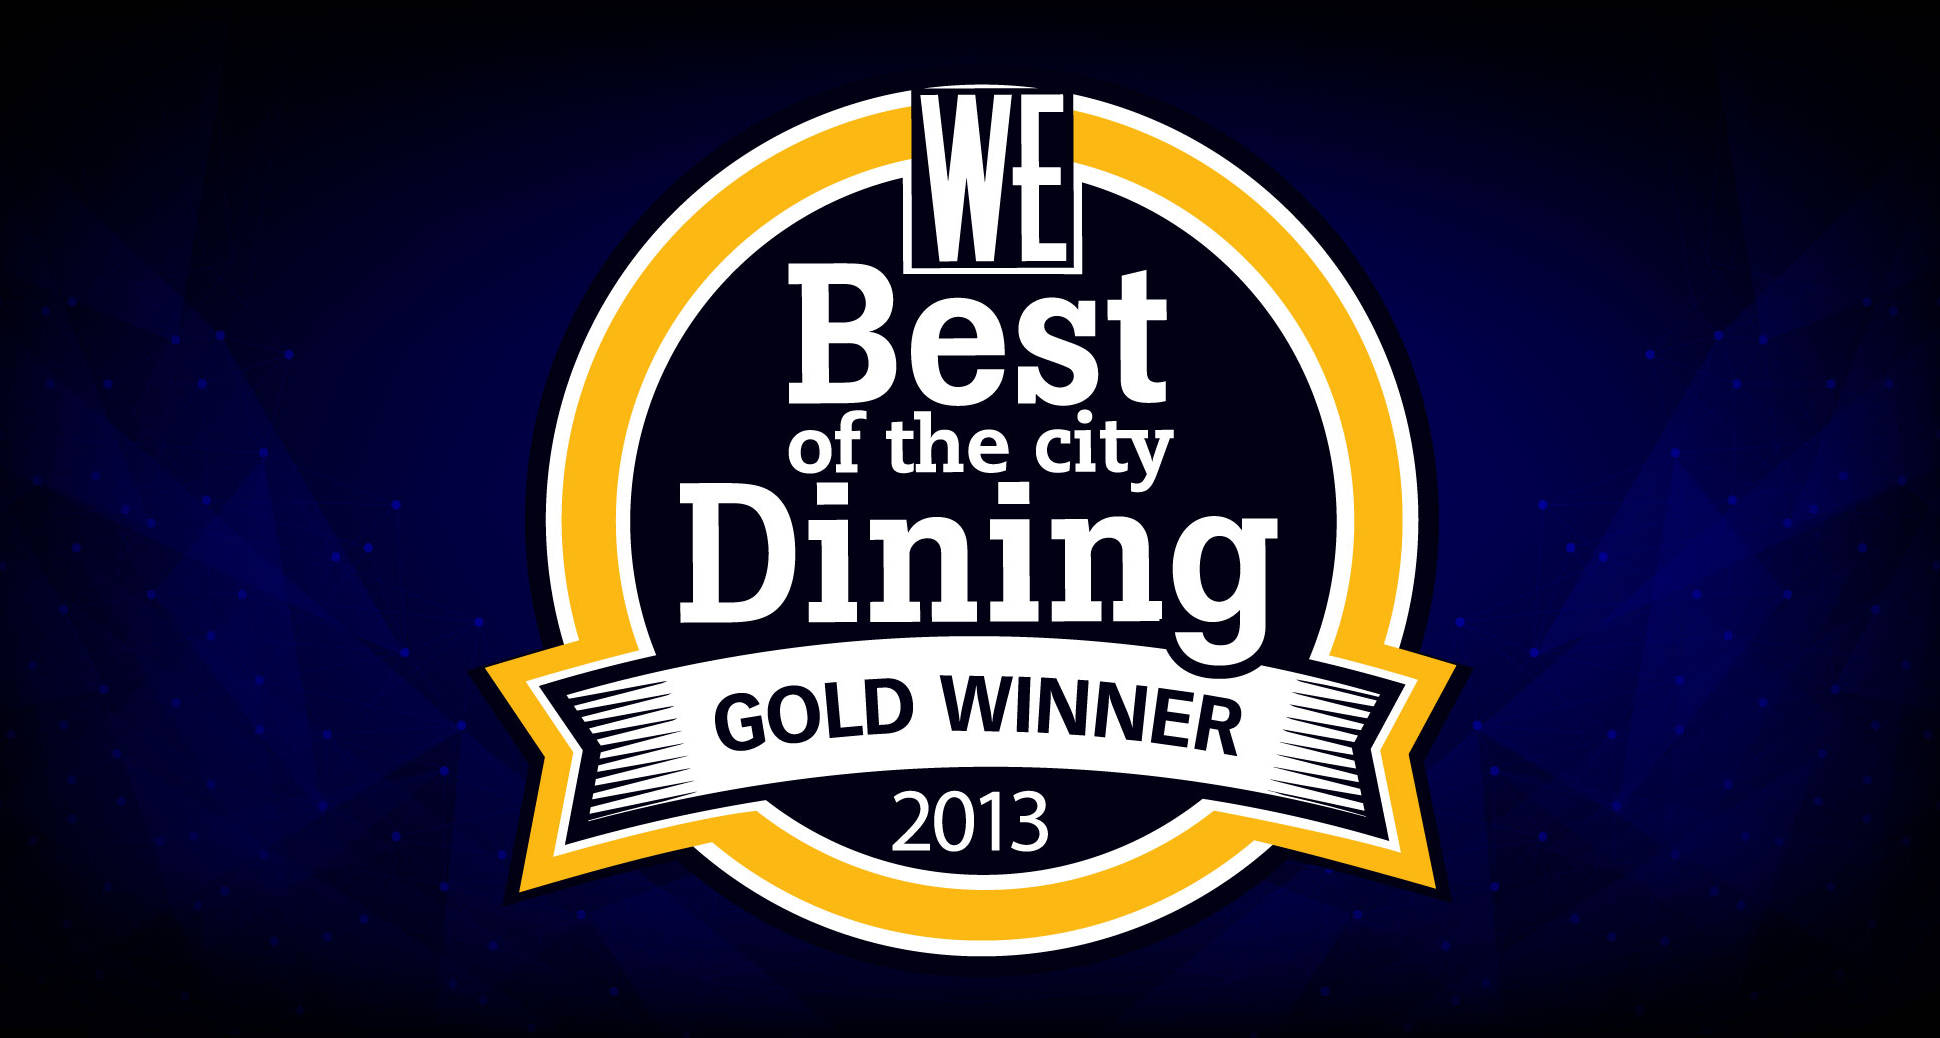 Sura is the best Korean winner of WE Vancouver’s best of the city dining 2013!